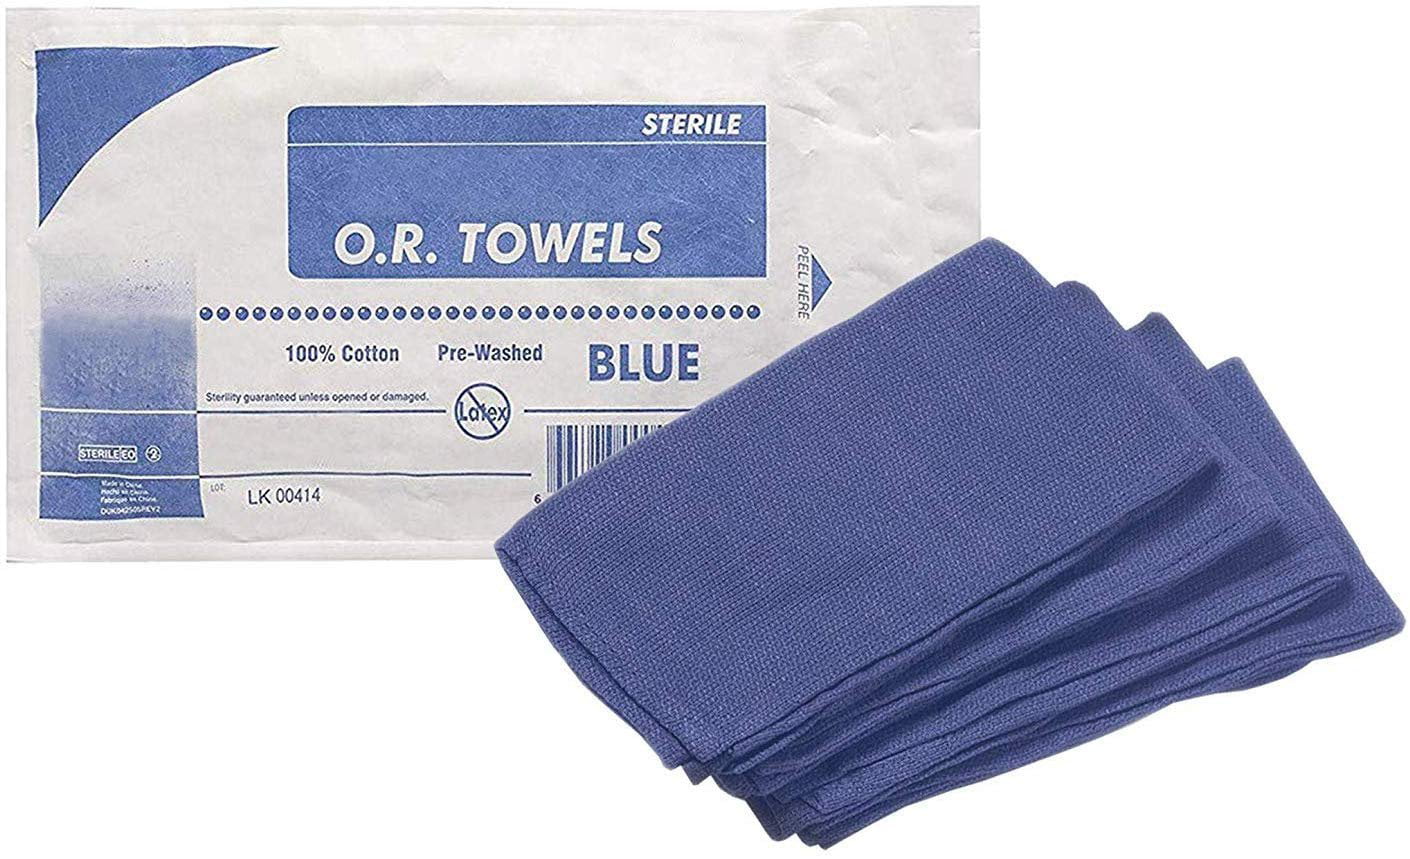 Pack of 4 OR Towels for Medical Facilities Blue Color. Sterile Absorbent Towels Latex-Free Pre-Washed 100% Cotton Operating Room Towels 17” x 26”